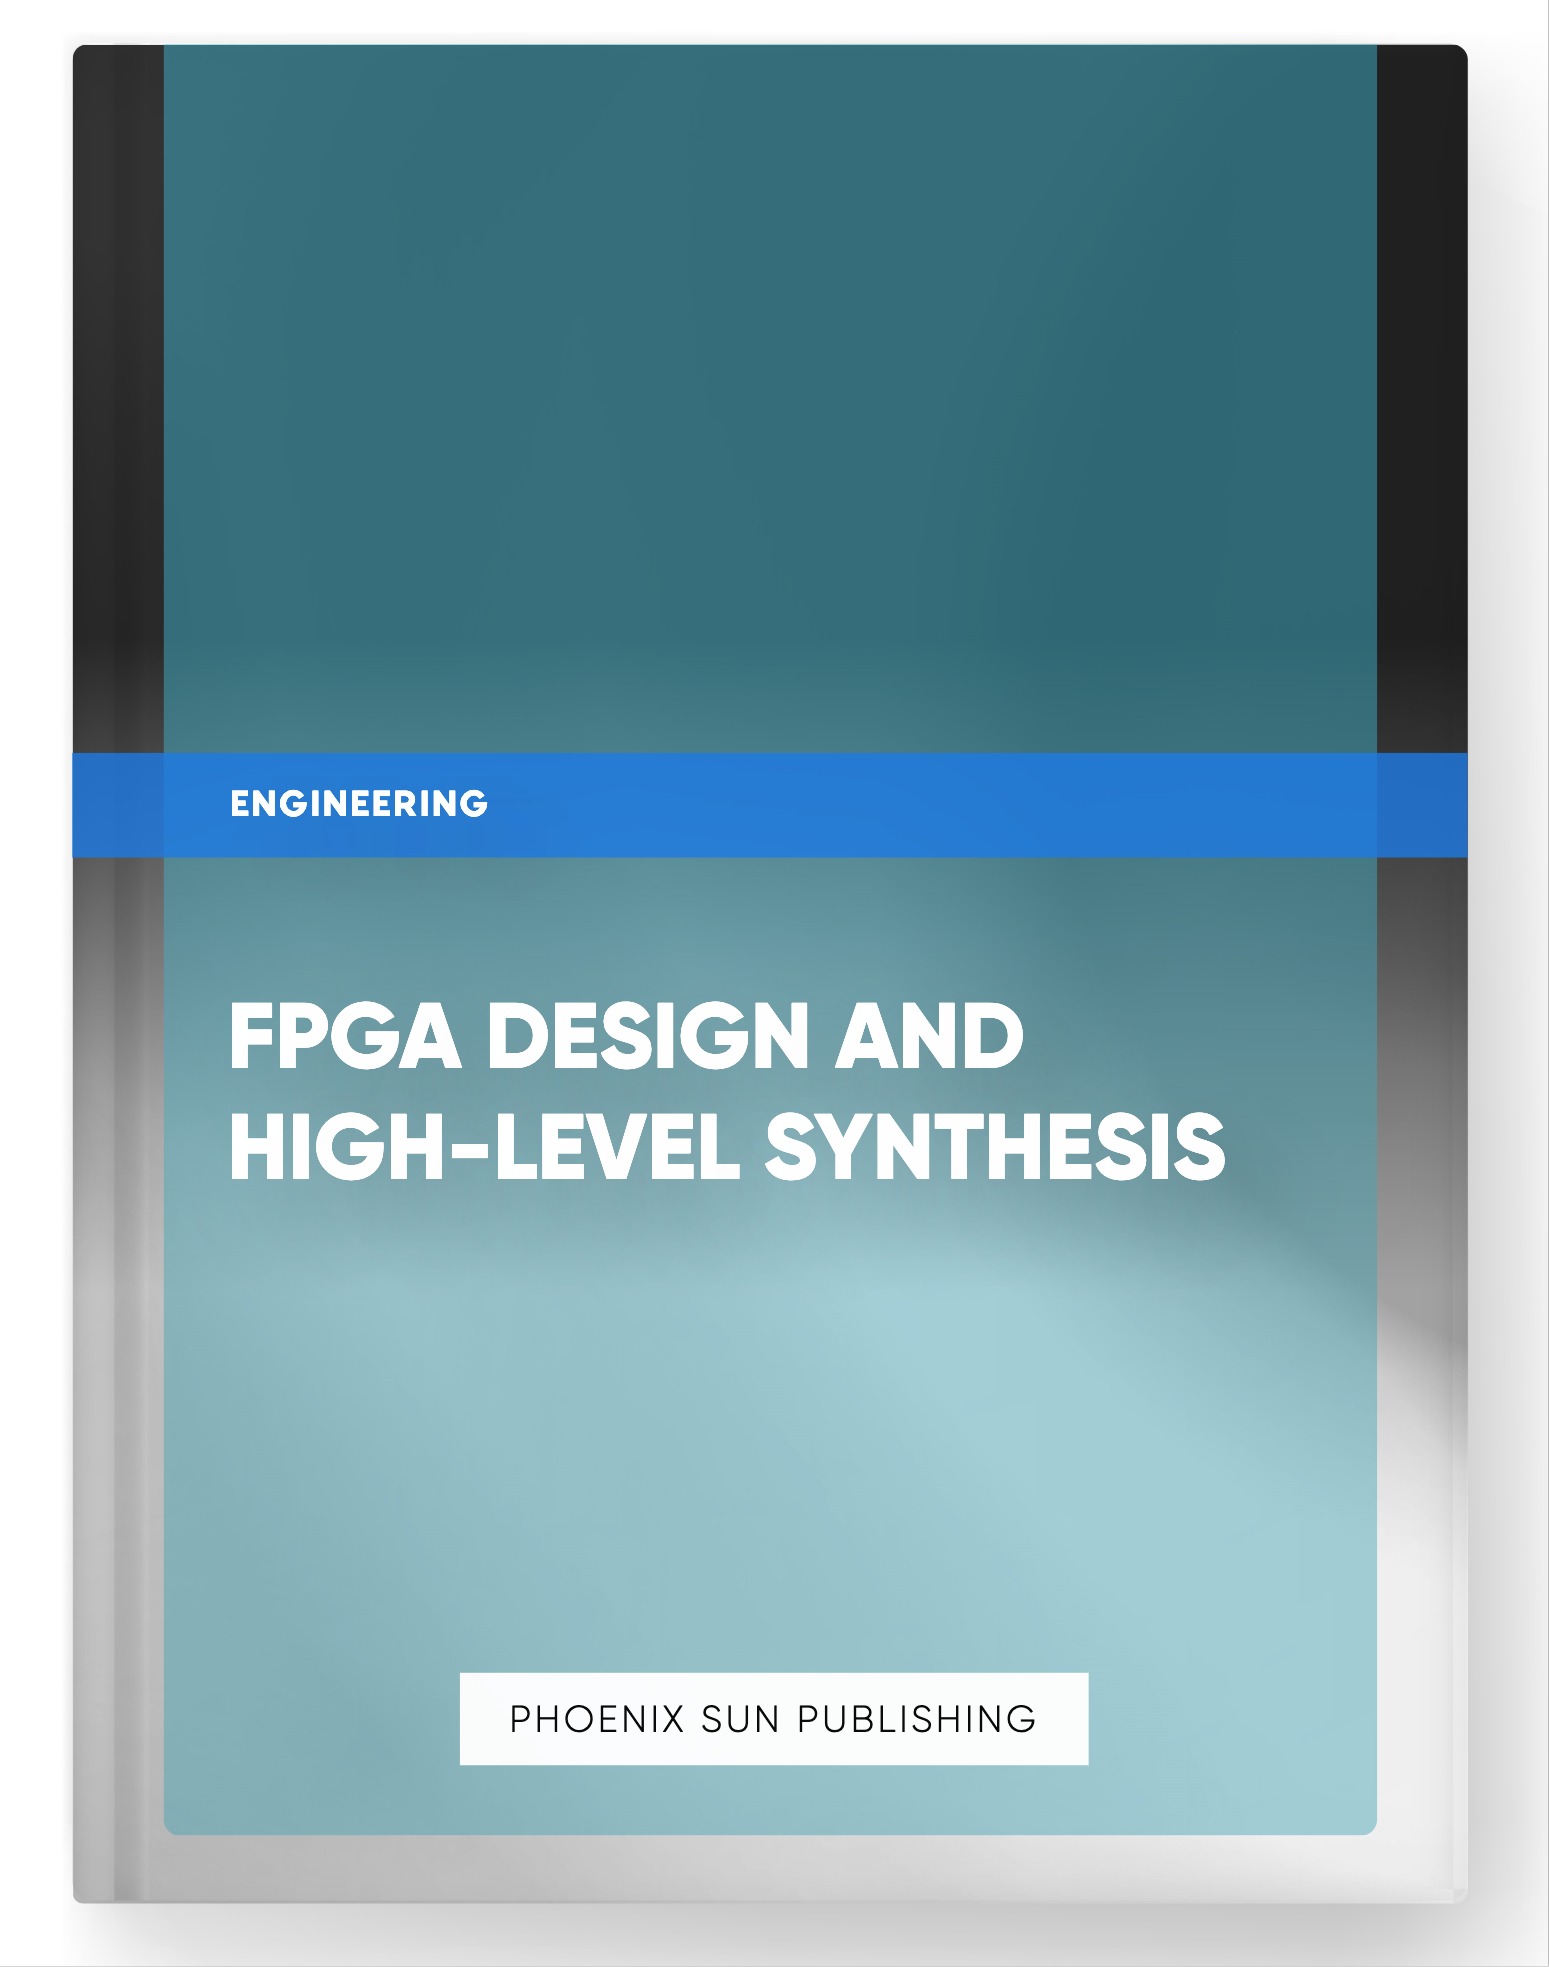 FPGA Design and High-Level Synthesis